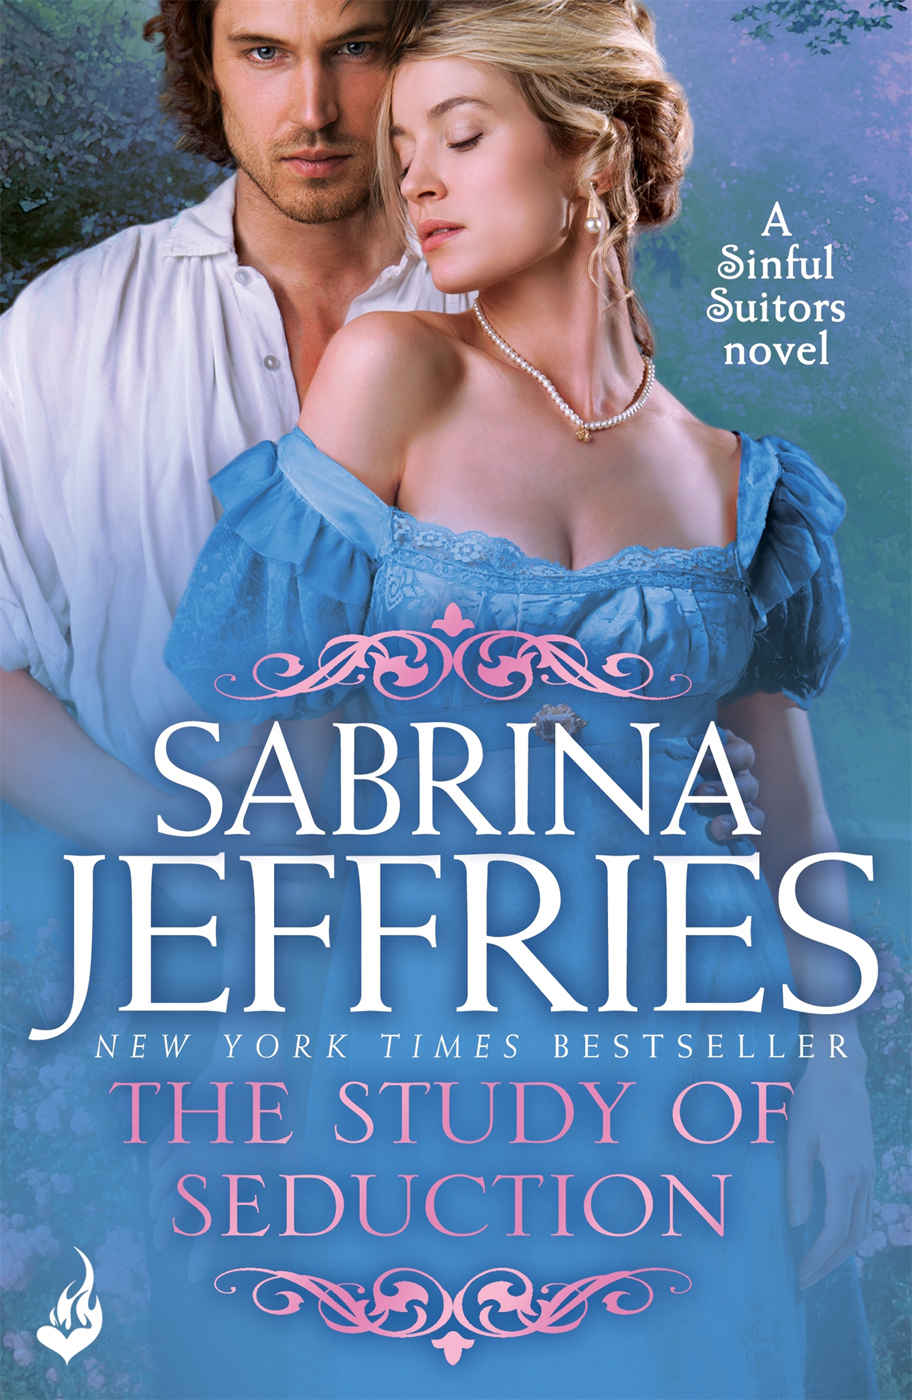 The Study of Seduction: Sinful Suitors 2 by Sabrina Jeffries